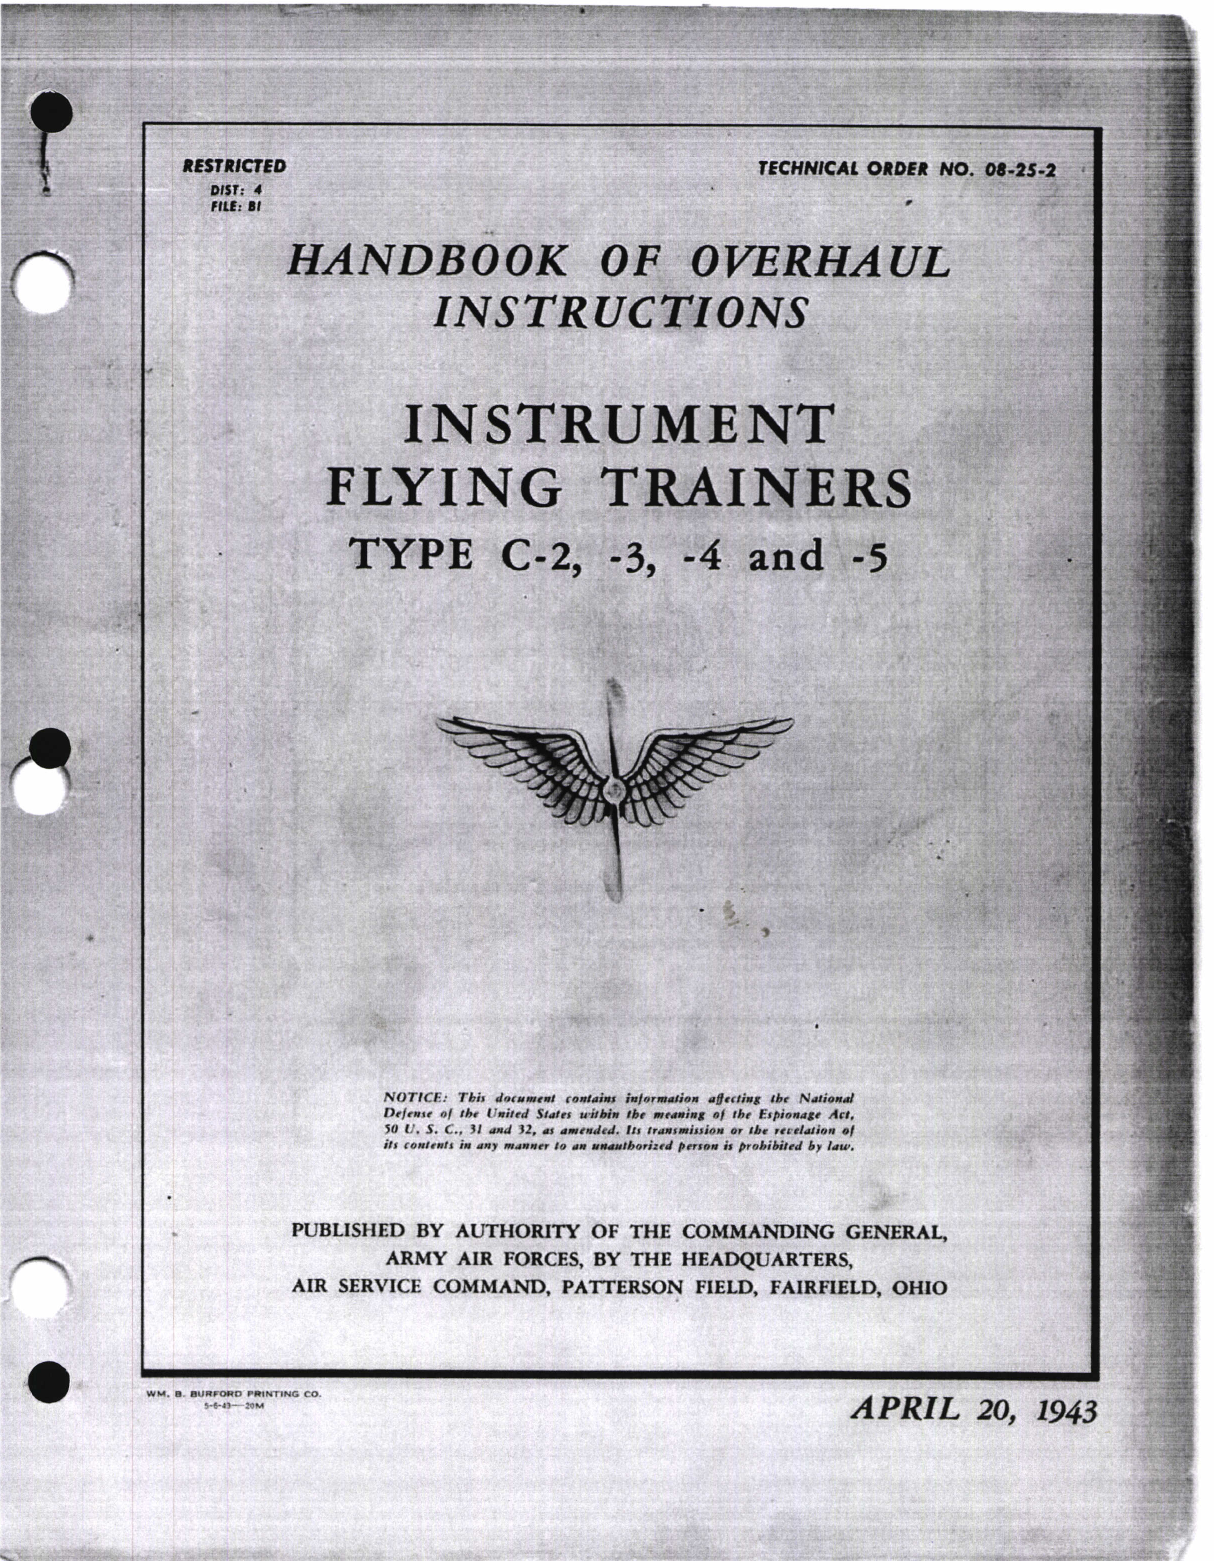 Sample page 1 from AirCorps Library document: Handbook of Overhaul Instructions for Instrument Flying Trainers Type C-2, C-3, C-4, and C-5